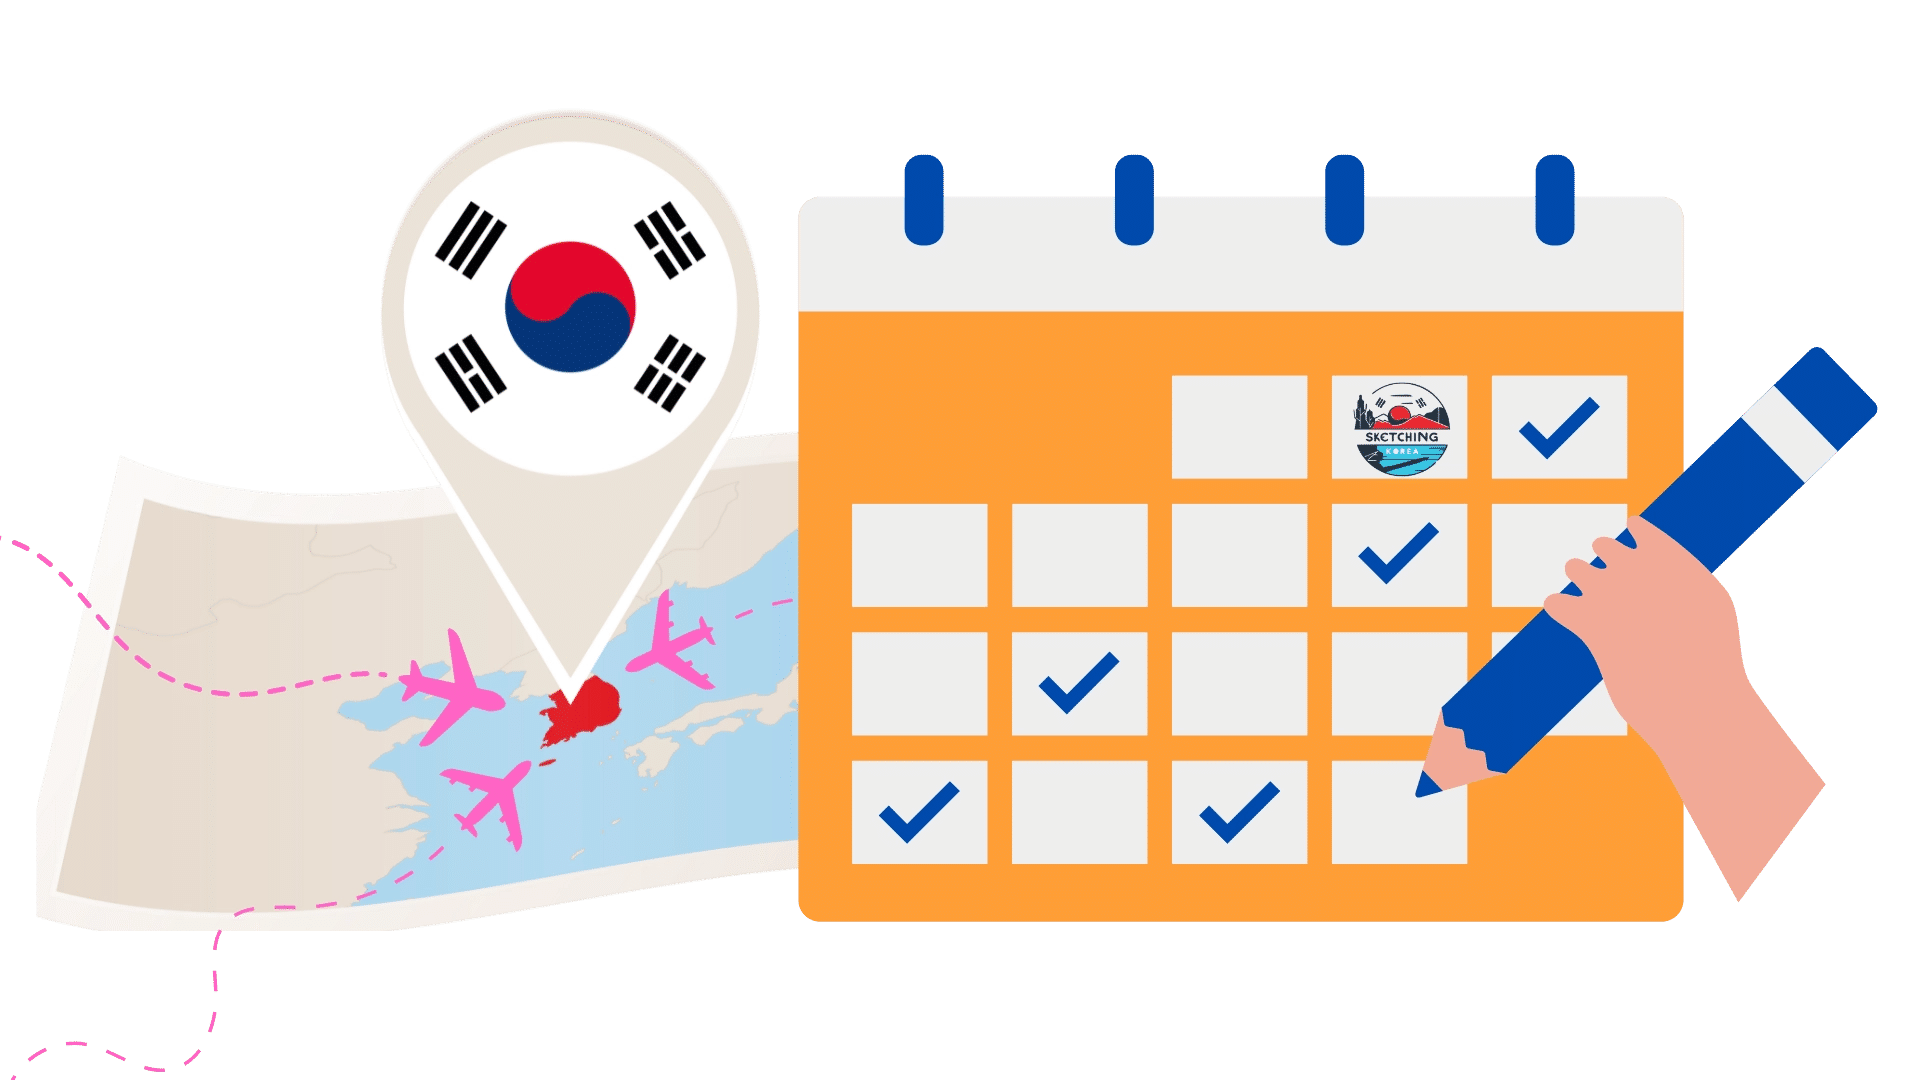 Dates and calendar information for Korean National Holidays, along with details about South Korean holidays and traditions.